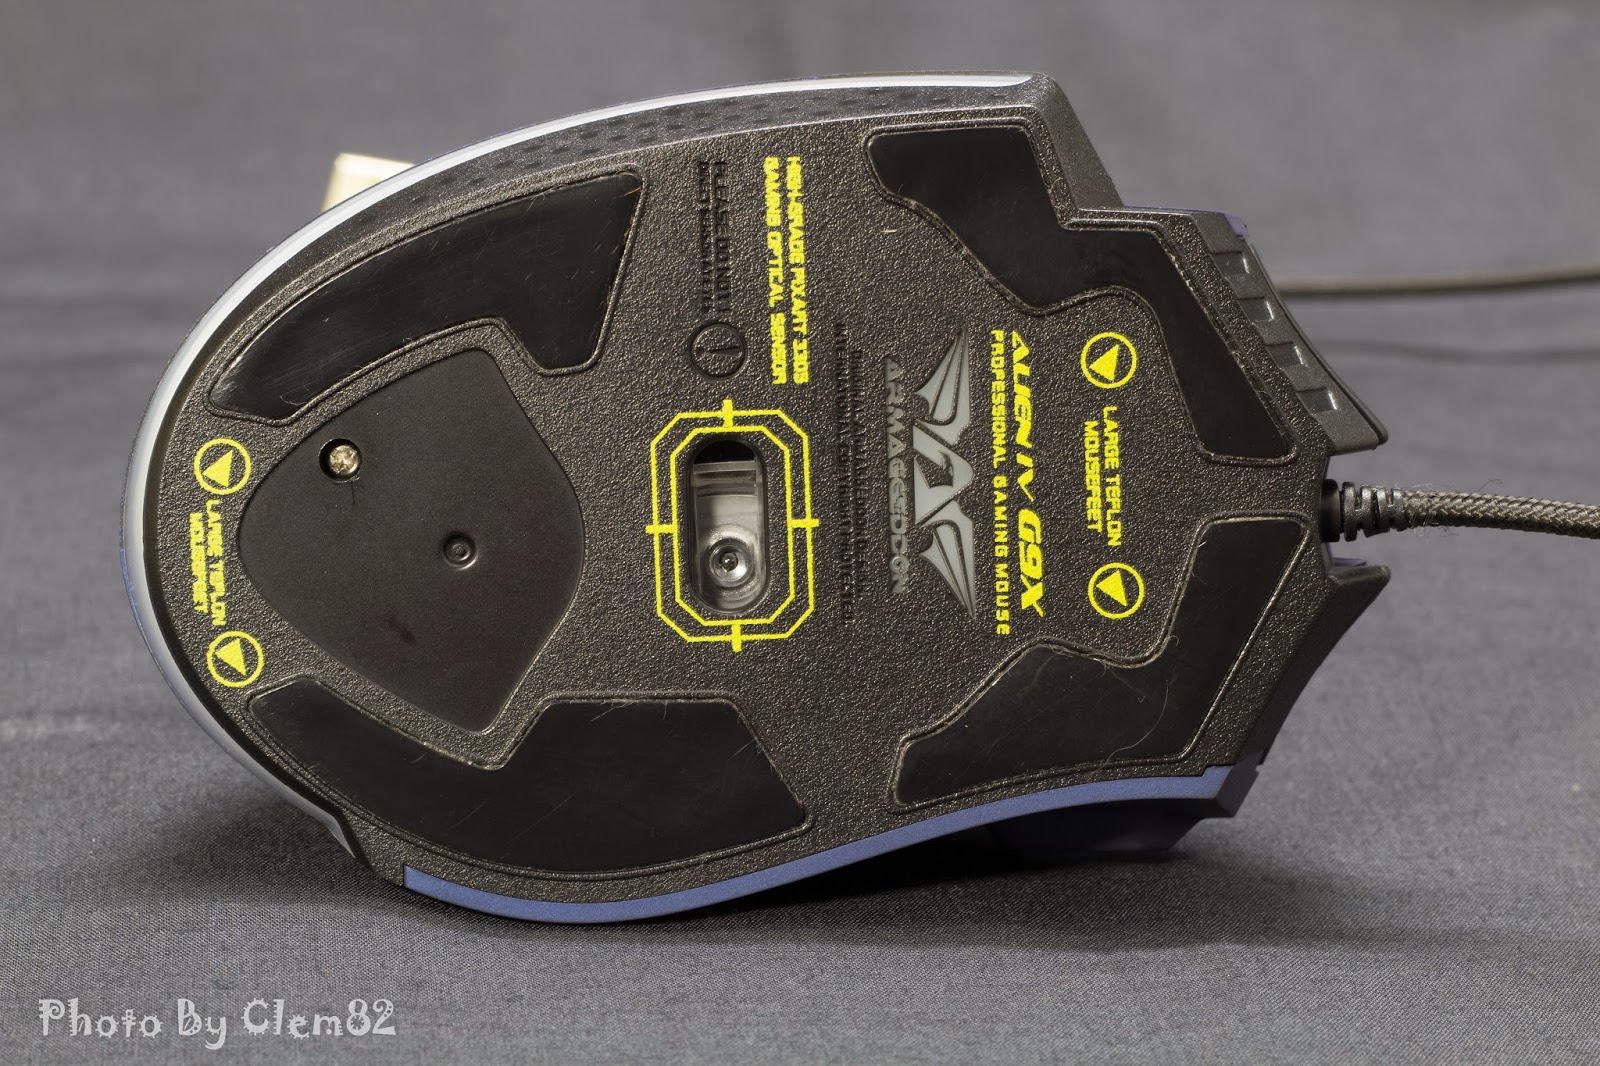 First Look & Review - Armaggeddon Alien IV G9X Optical Gaming Mouse 14